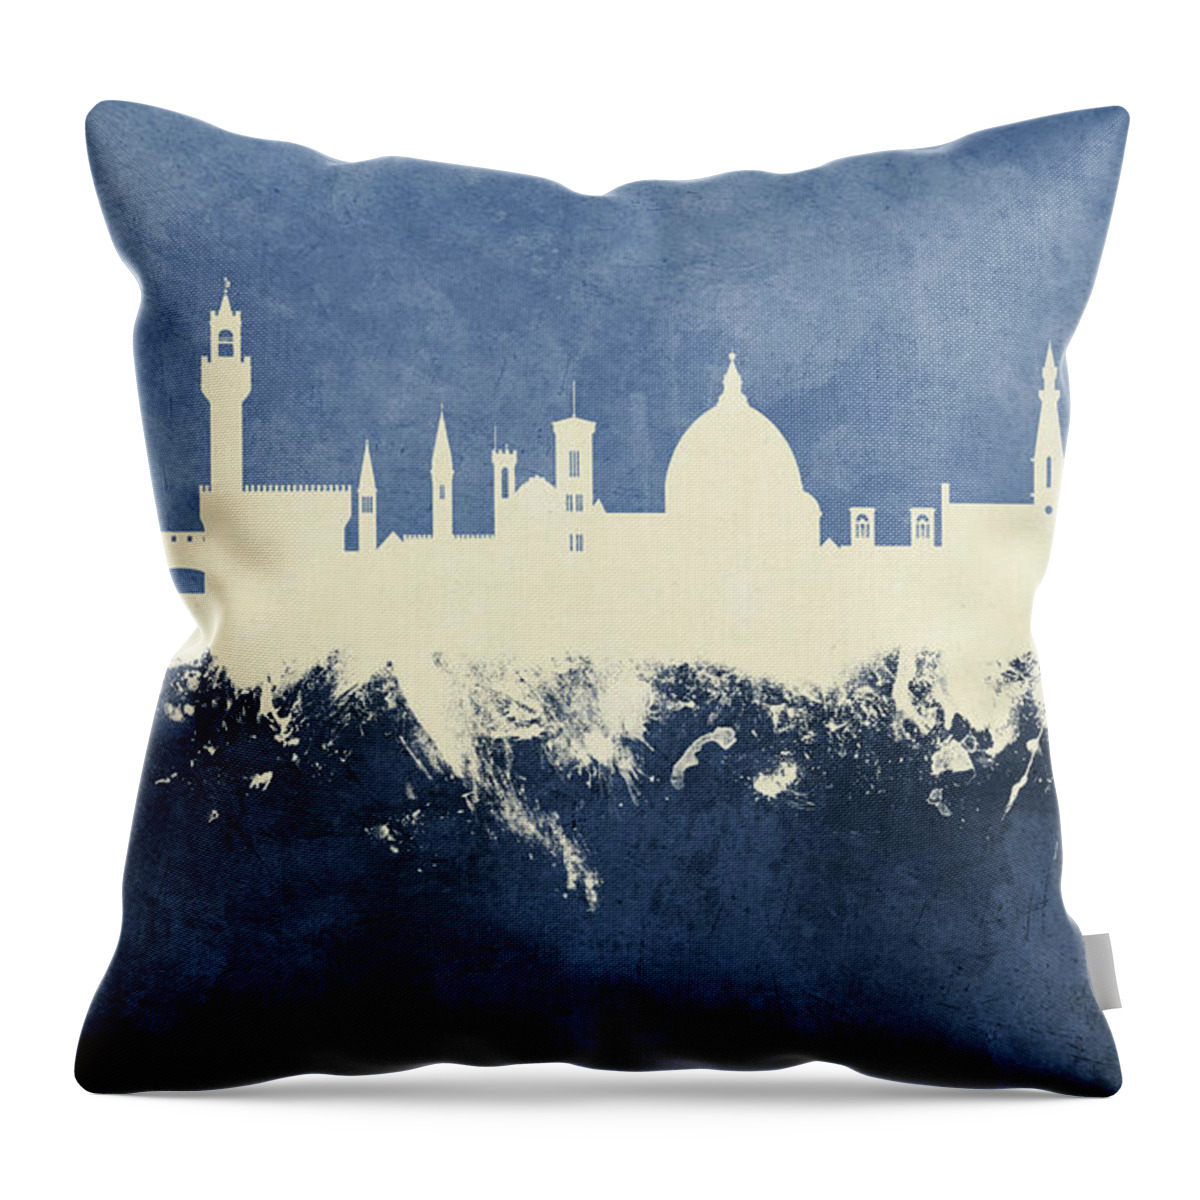 Florence Throw Pillow featuring the digital art Florence Italy Skyline #29 by Michael Tompsett